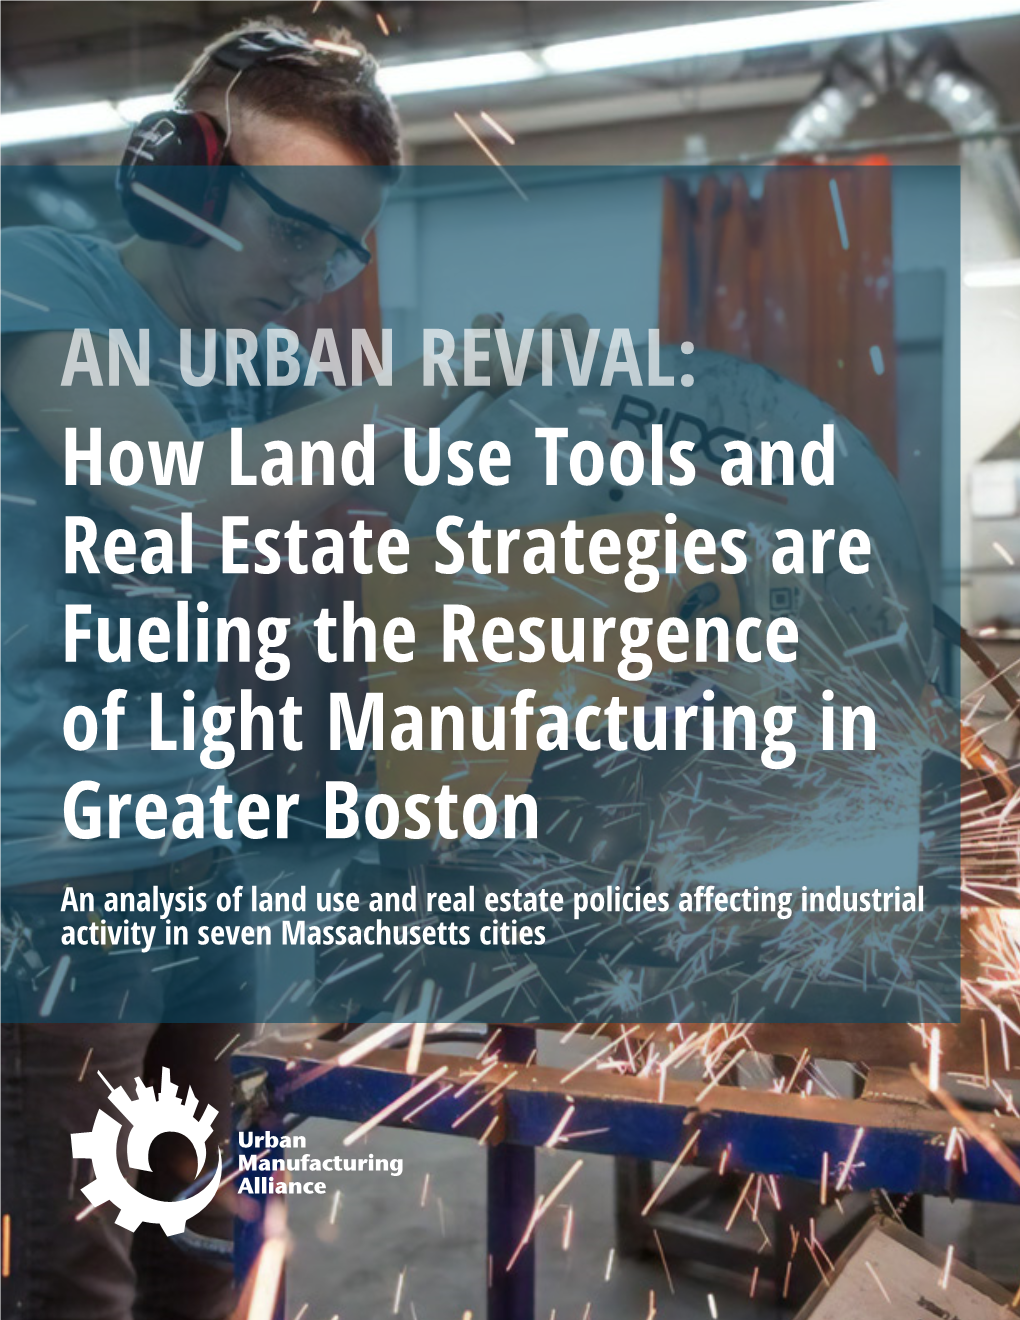 AN URBAN REVIVAL: How Land Use Tools and Real Estate Strategies